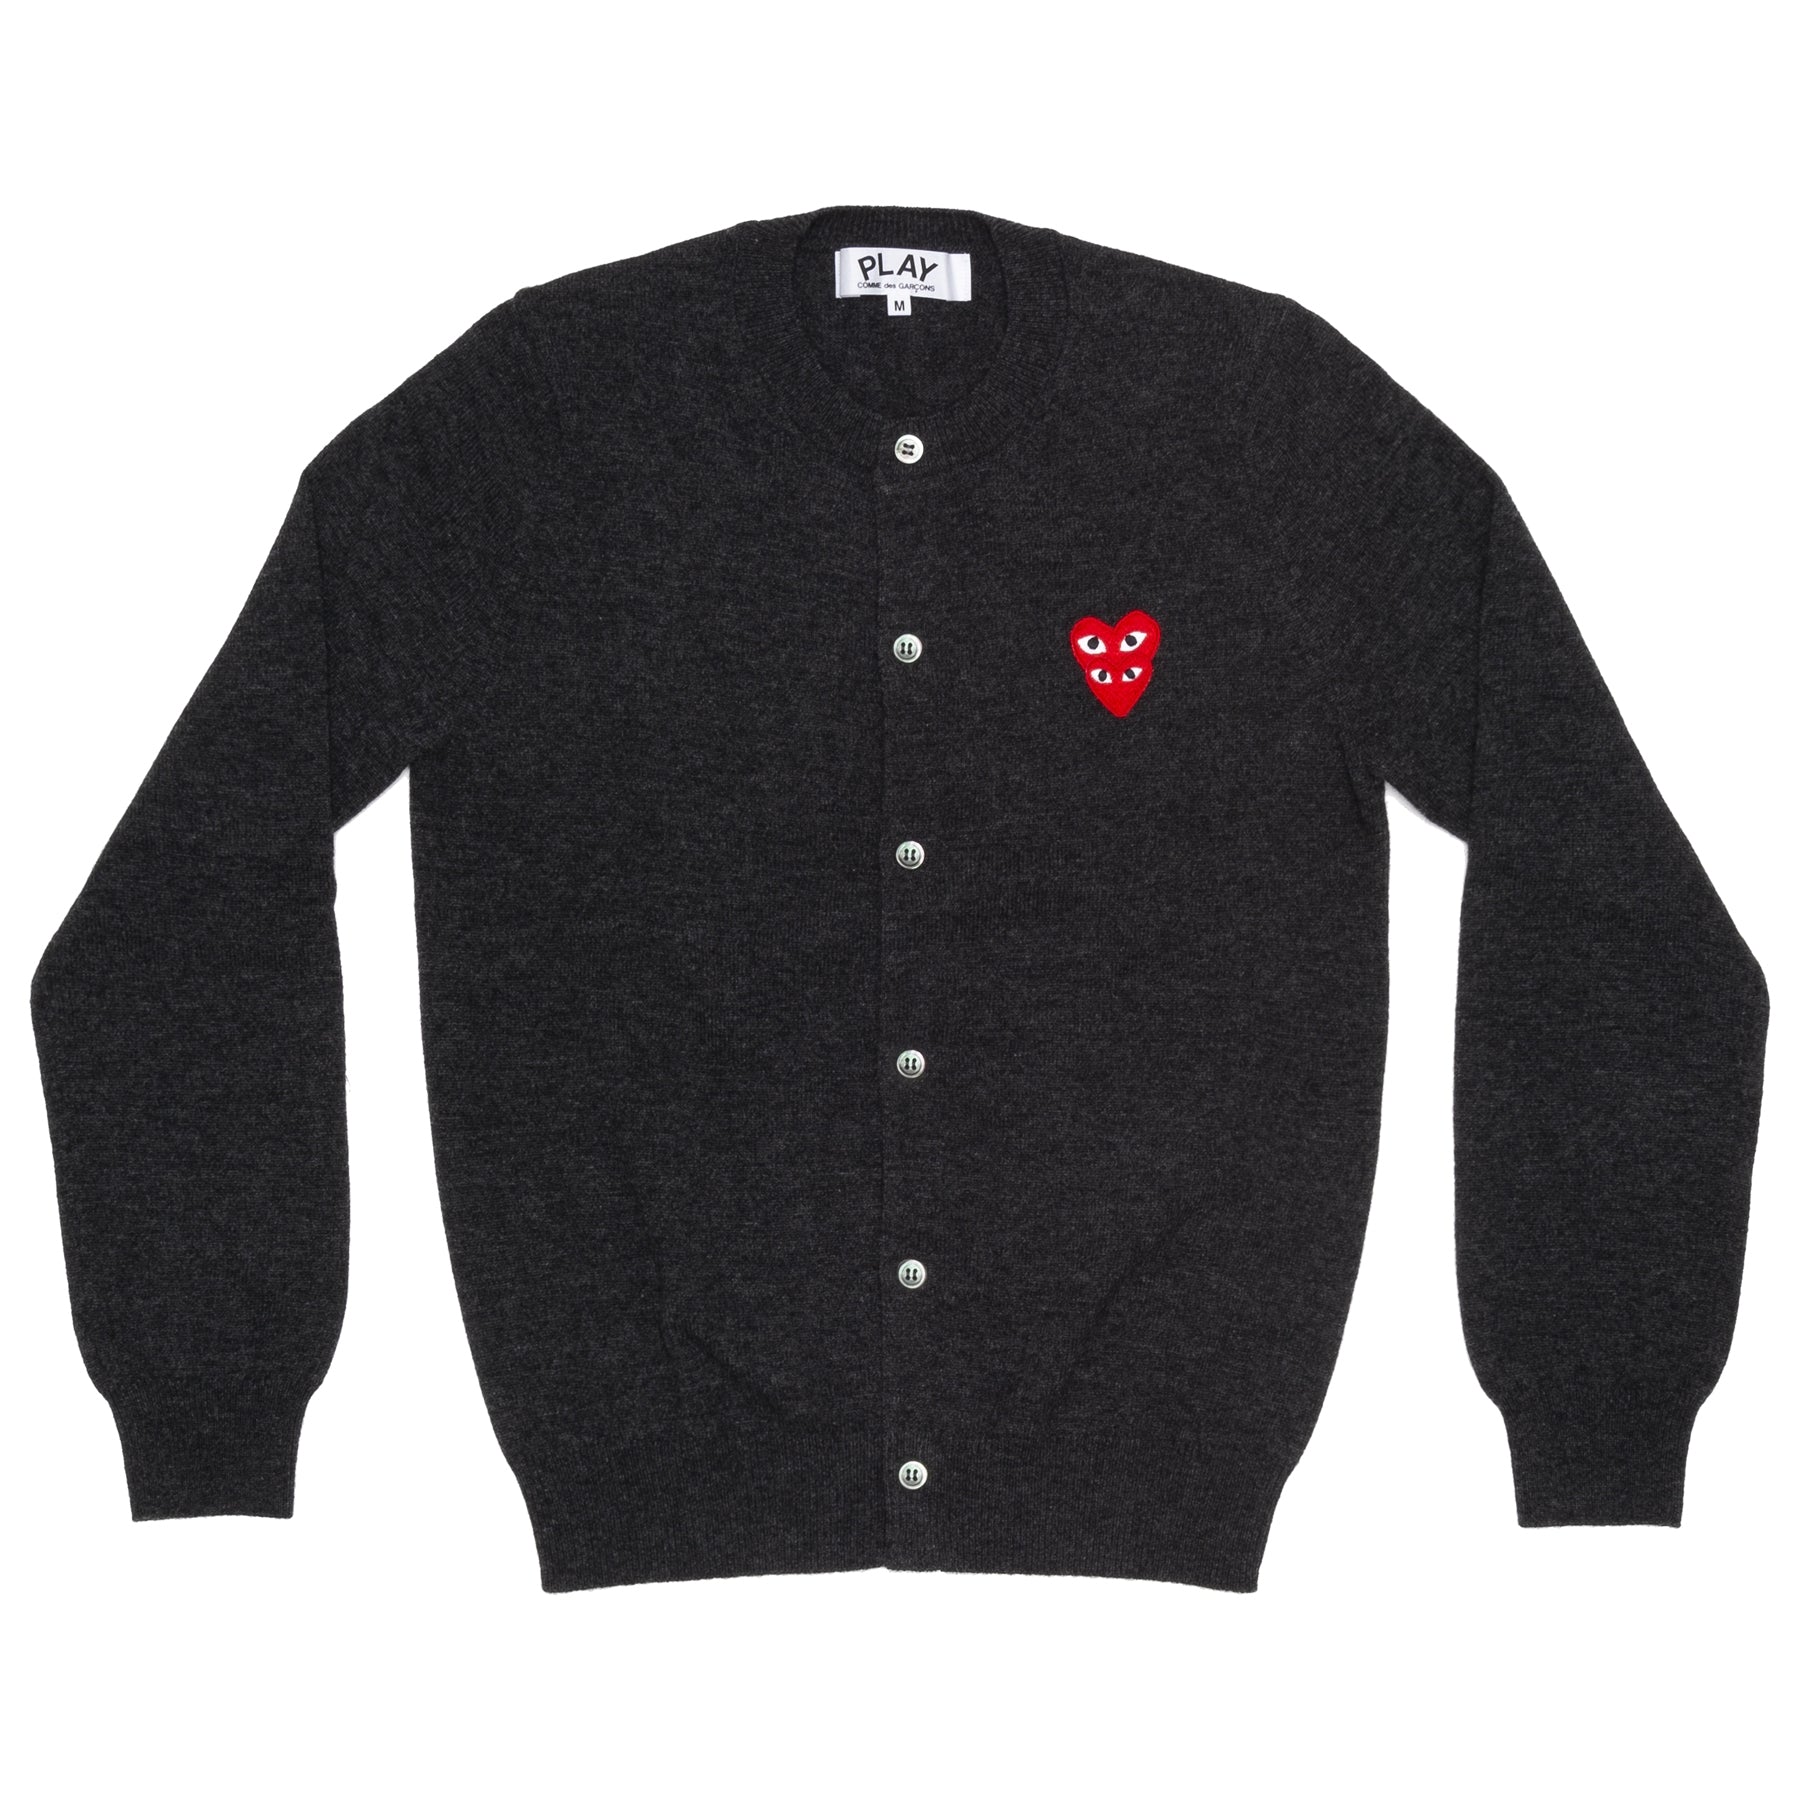 PLAY CDG - DOUBLE RED HEART WOMENS CREW NECK CARDIGAN - (CHACOAL GREY) view 1